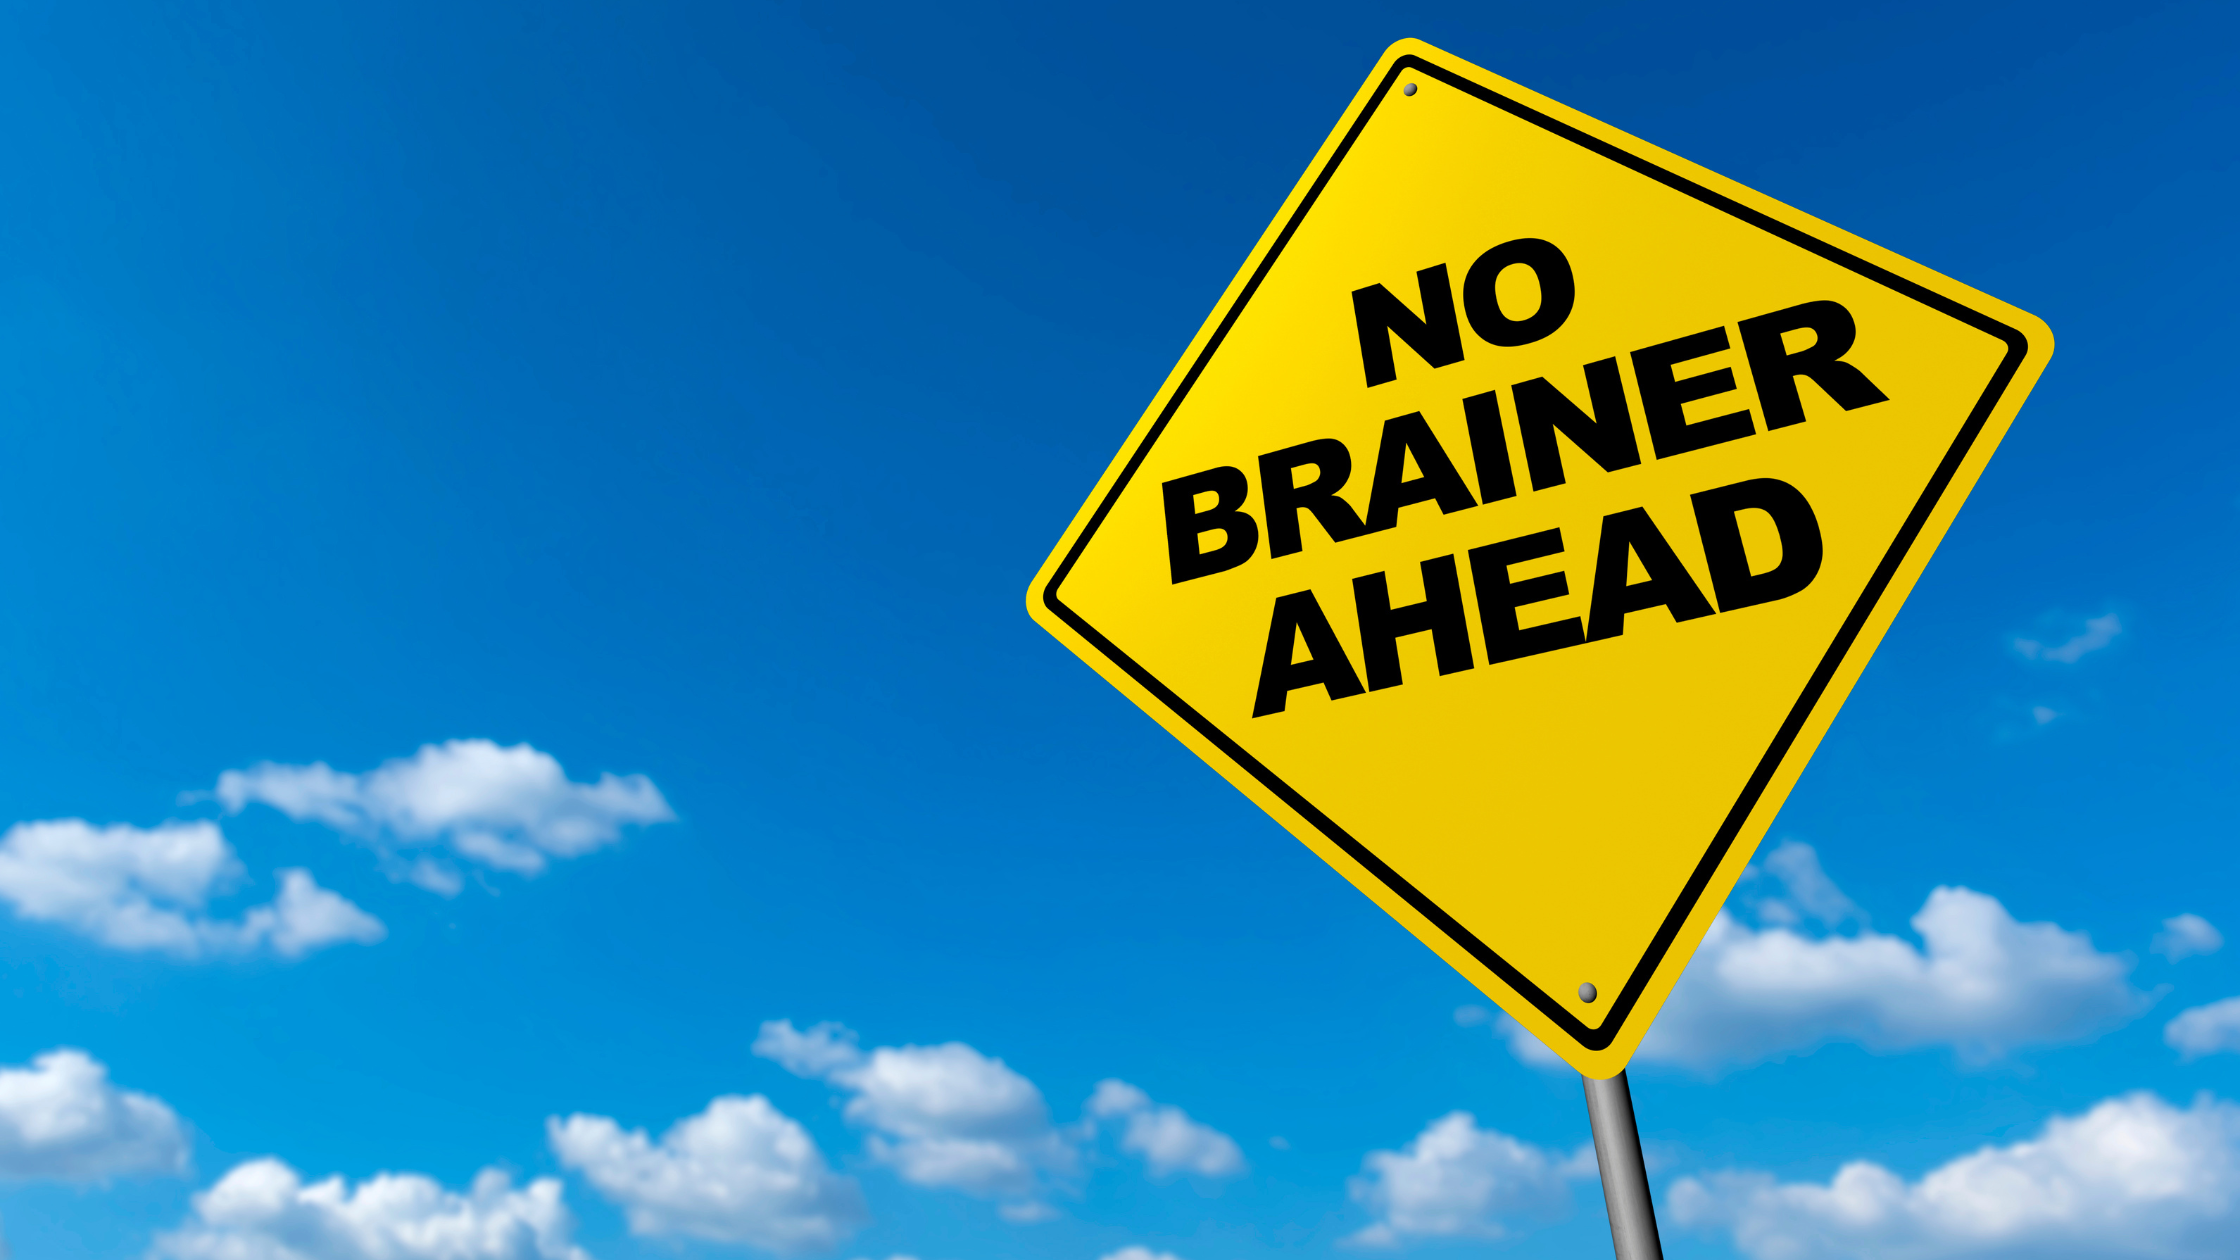 Why Do They Keep Using The Term "No Brainer" In The Workplace?